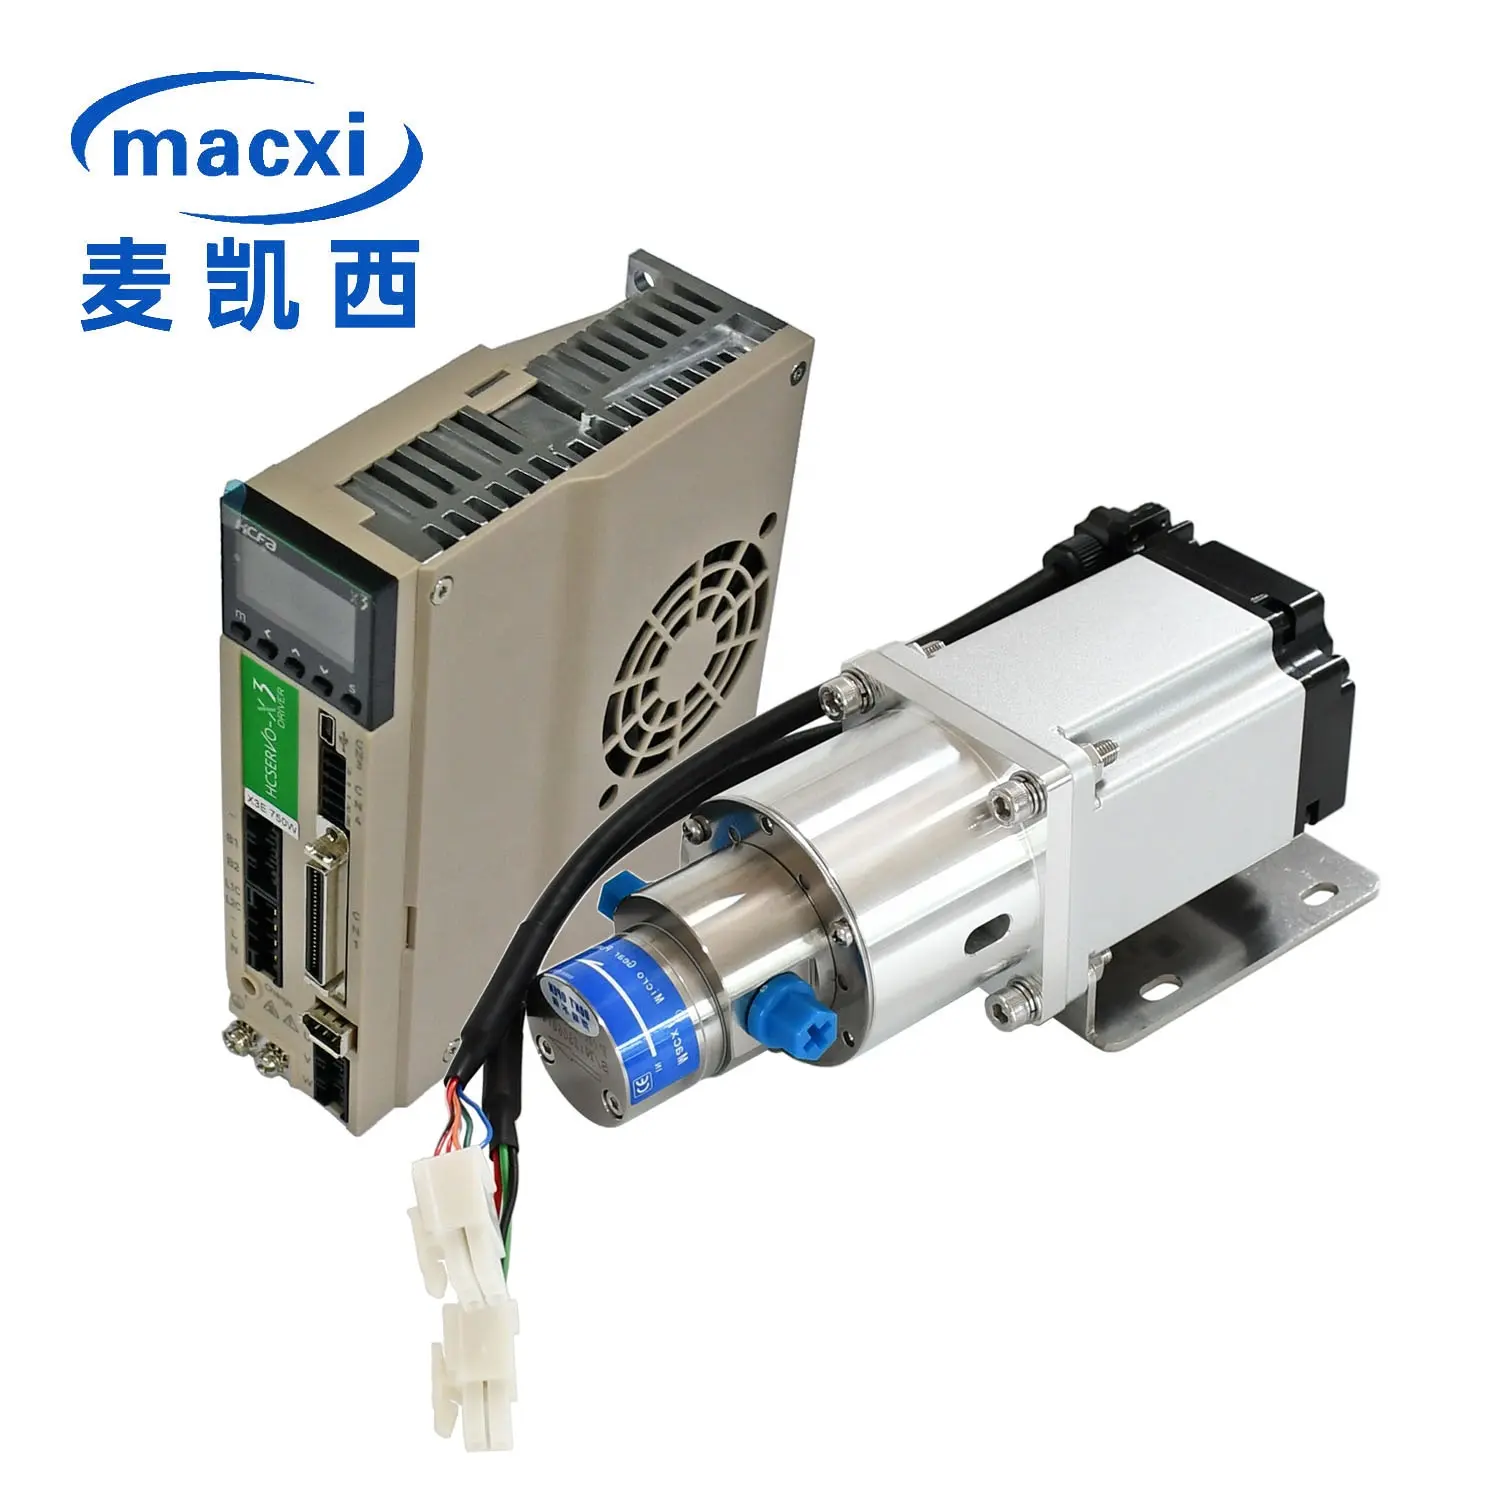 magnet gear pump for precision of Organic phase solutions (such as ethanol, methanol, etc.)